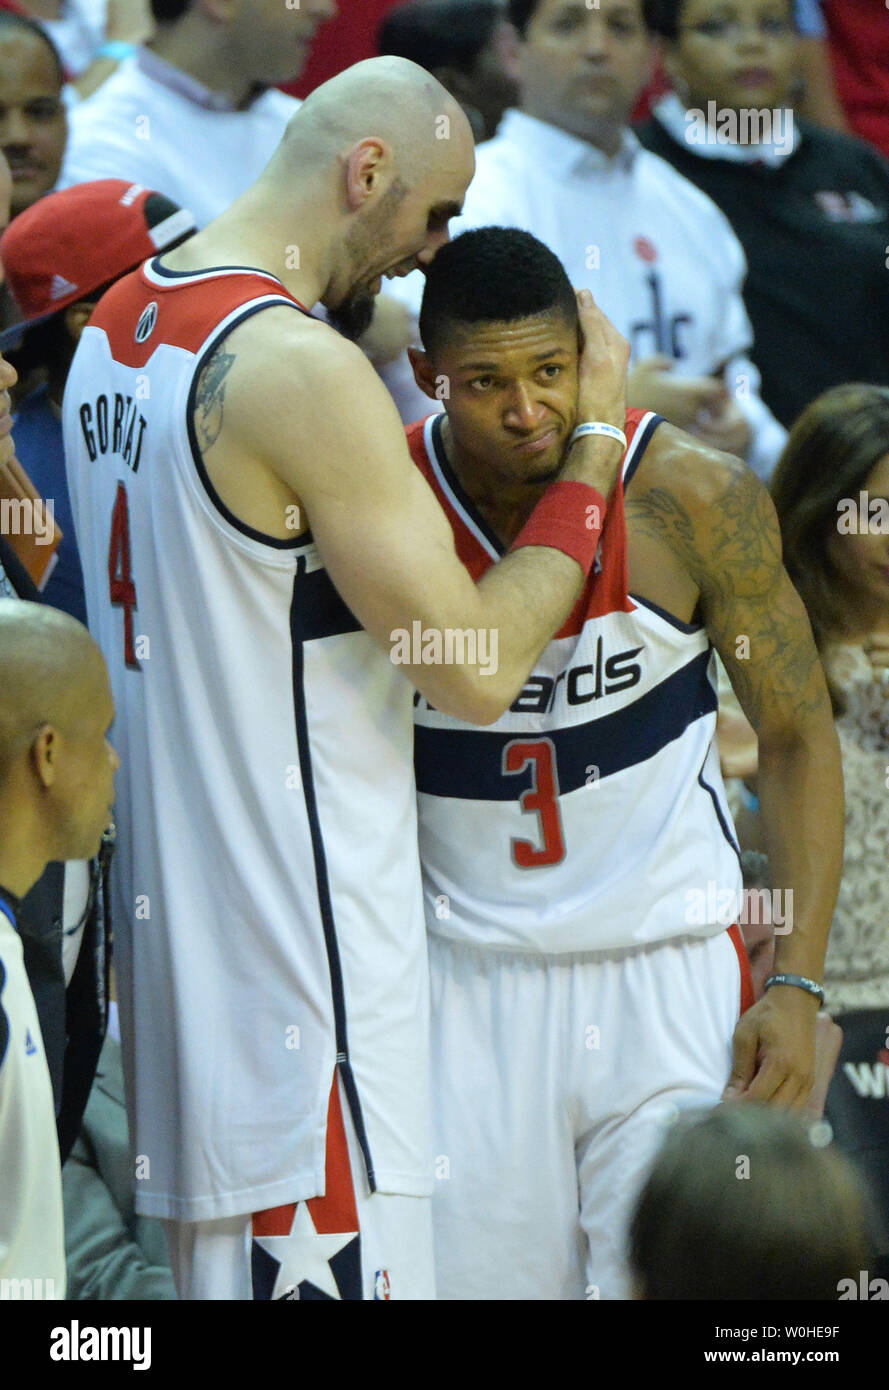 Bradley Beal Says Marcin Gortat “Has Every Character of a Black